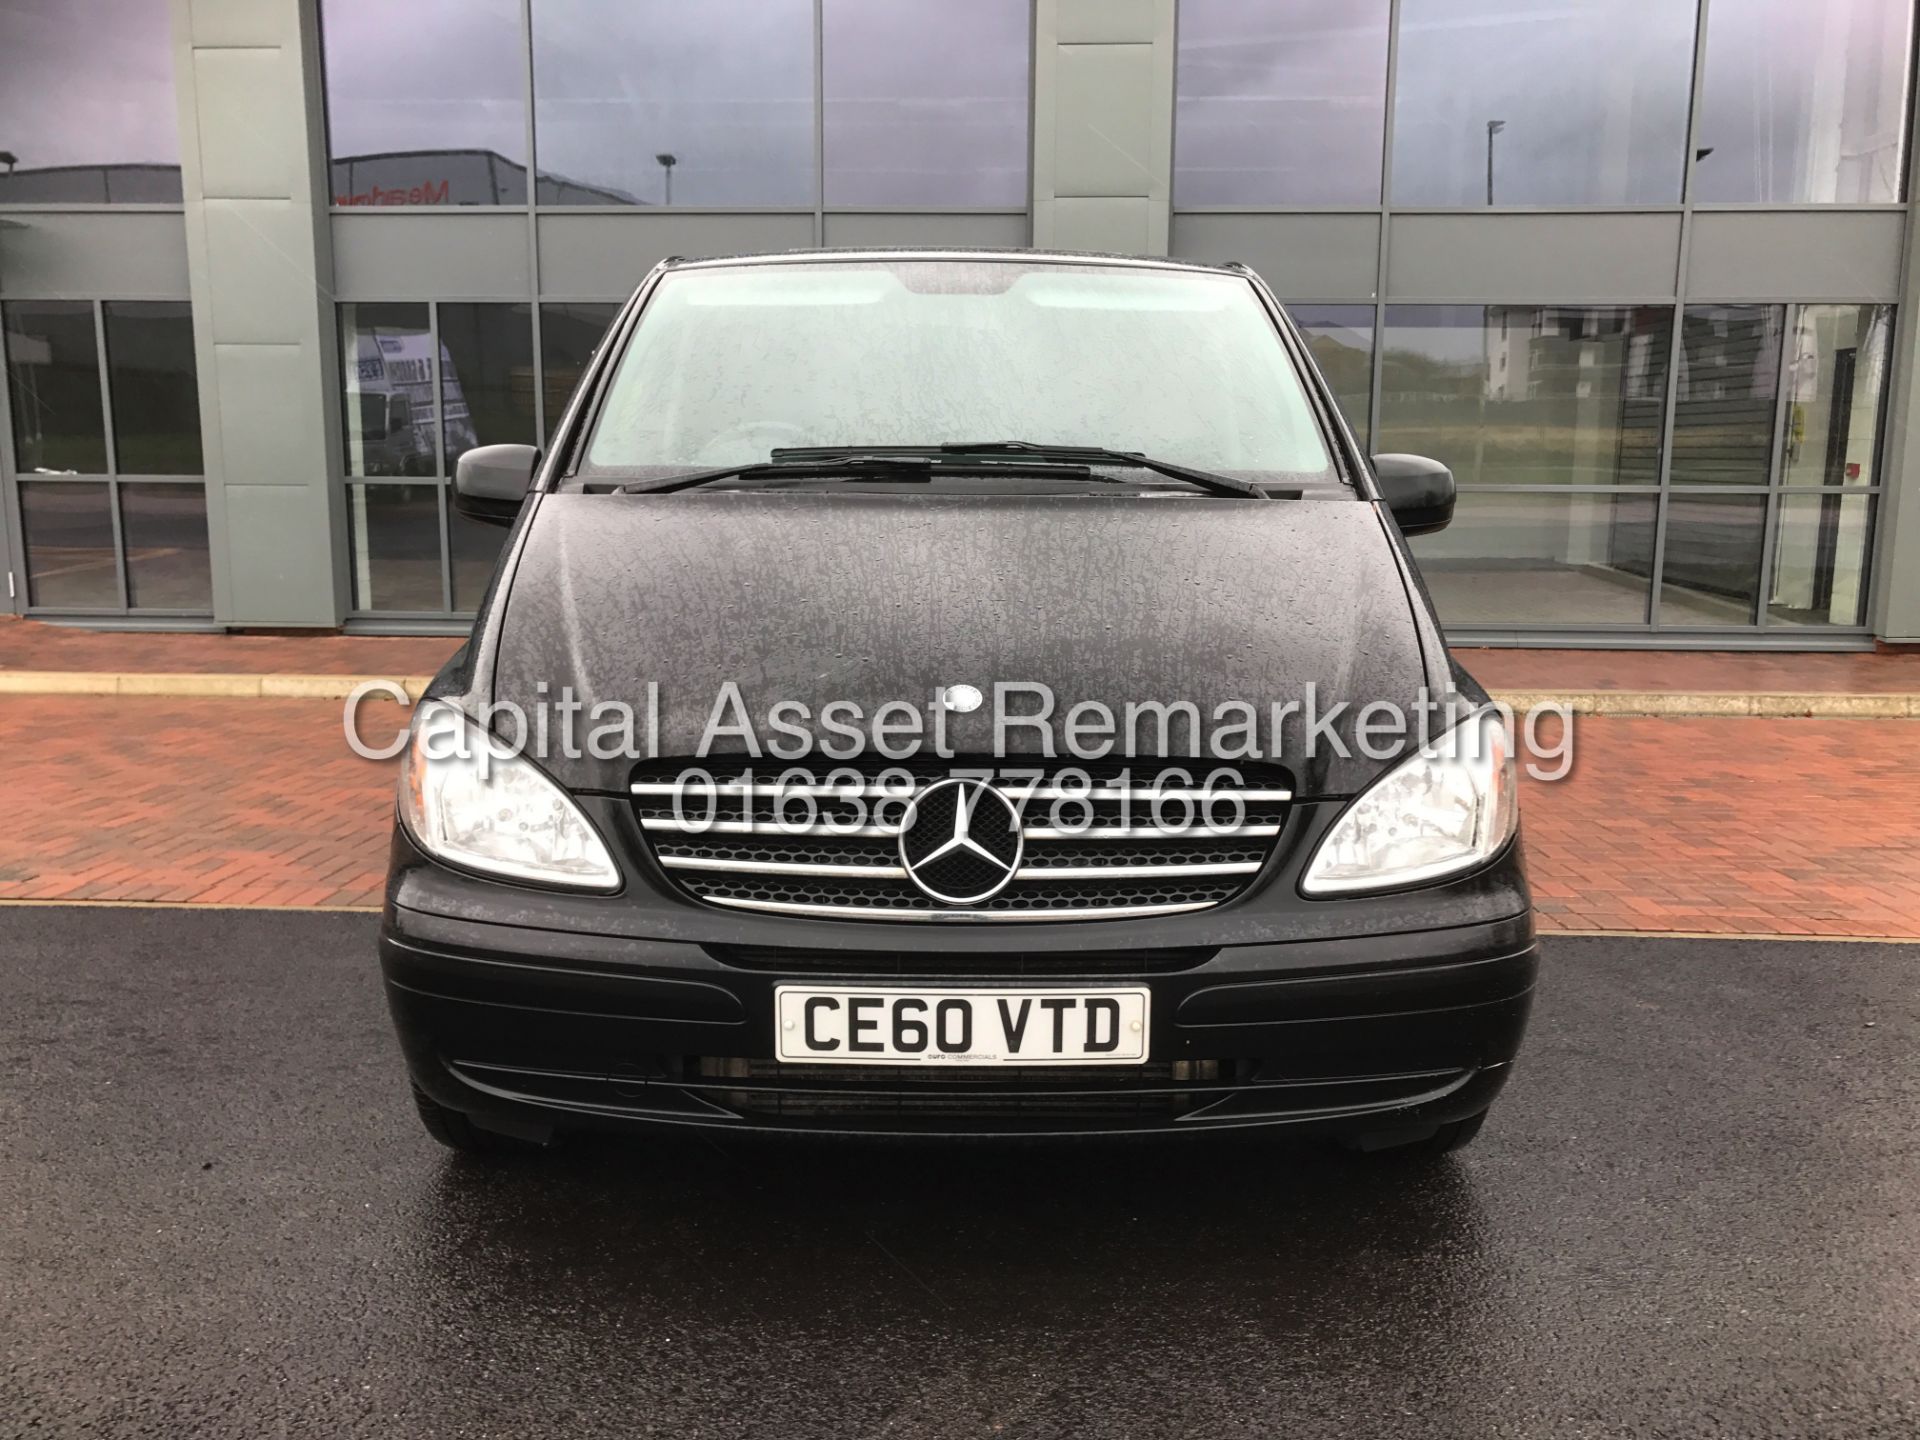 (ON SALE) MERCEDES VITO "SPORTY - 115BHP" LWB (2011 MODEL) 5 SEATER DUELINER -1 OWNER-AIR CON-ALLOYS - Image 3 of 18